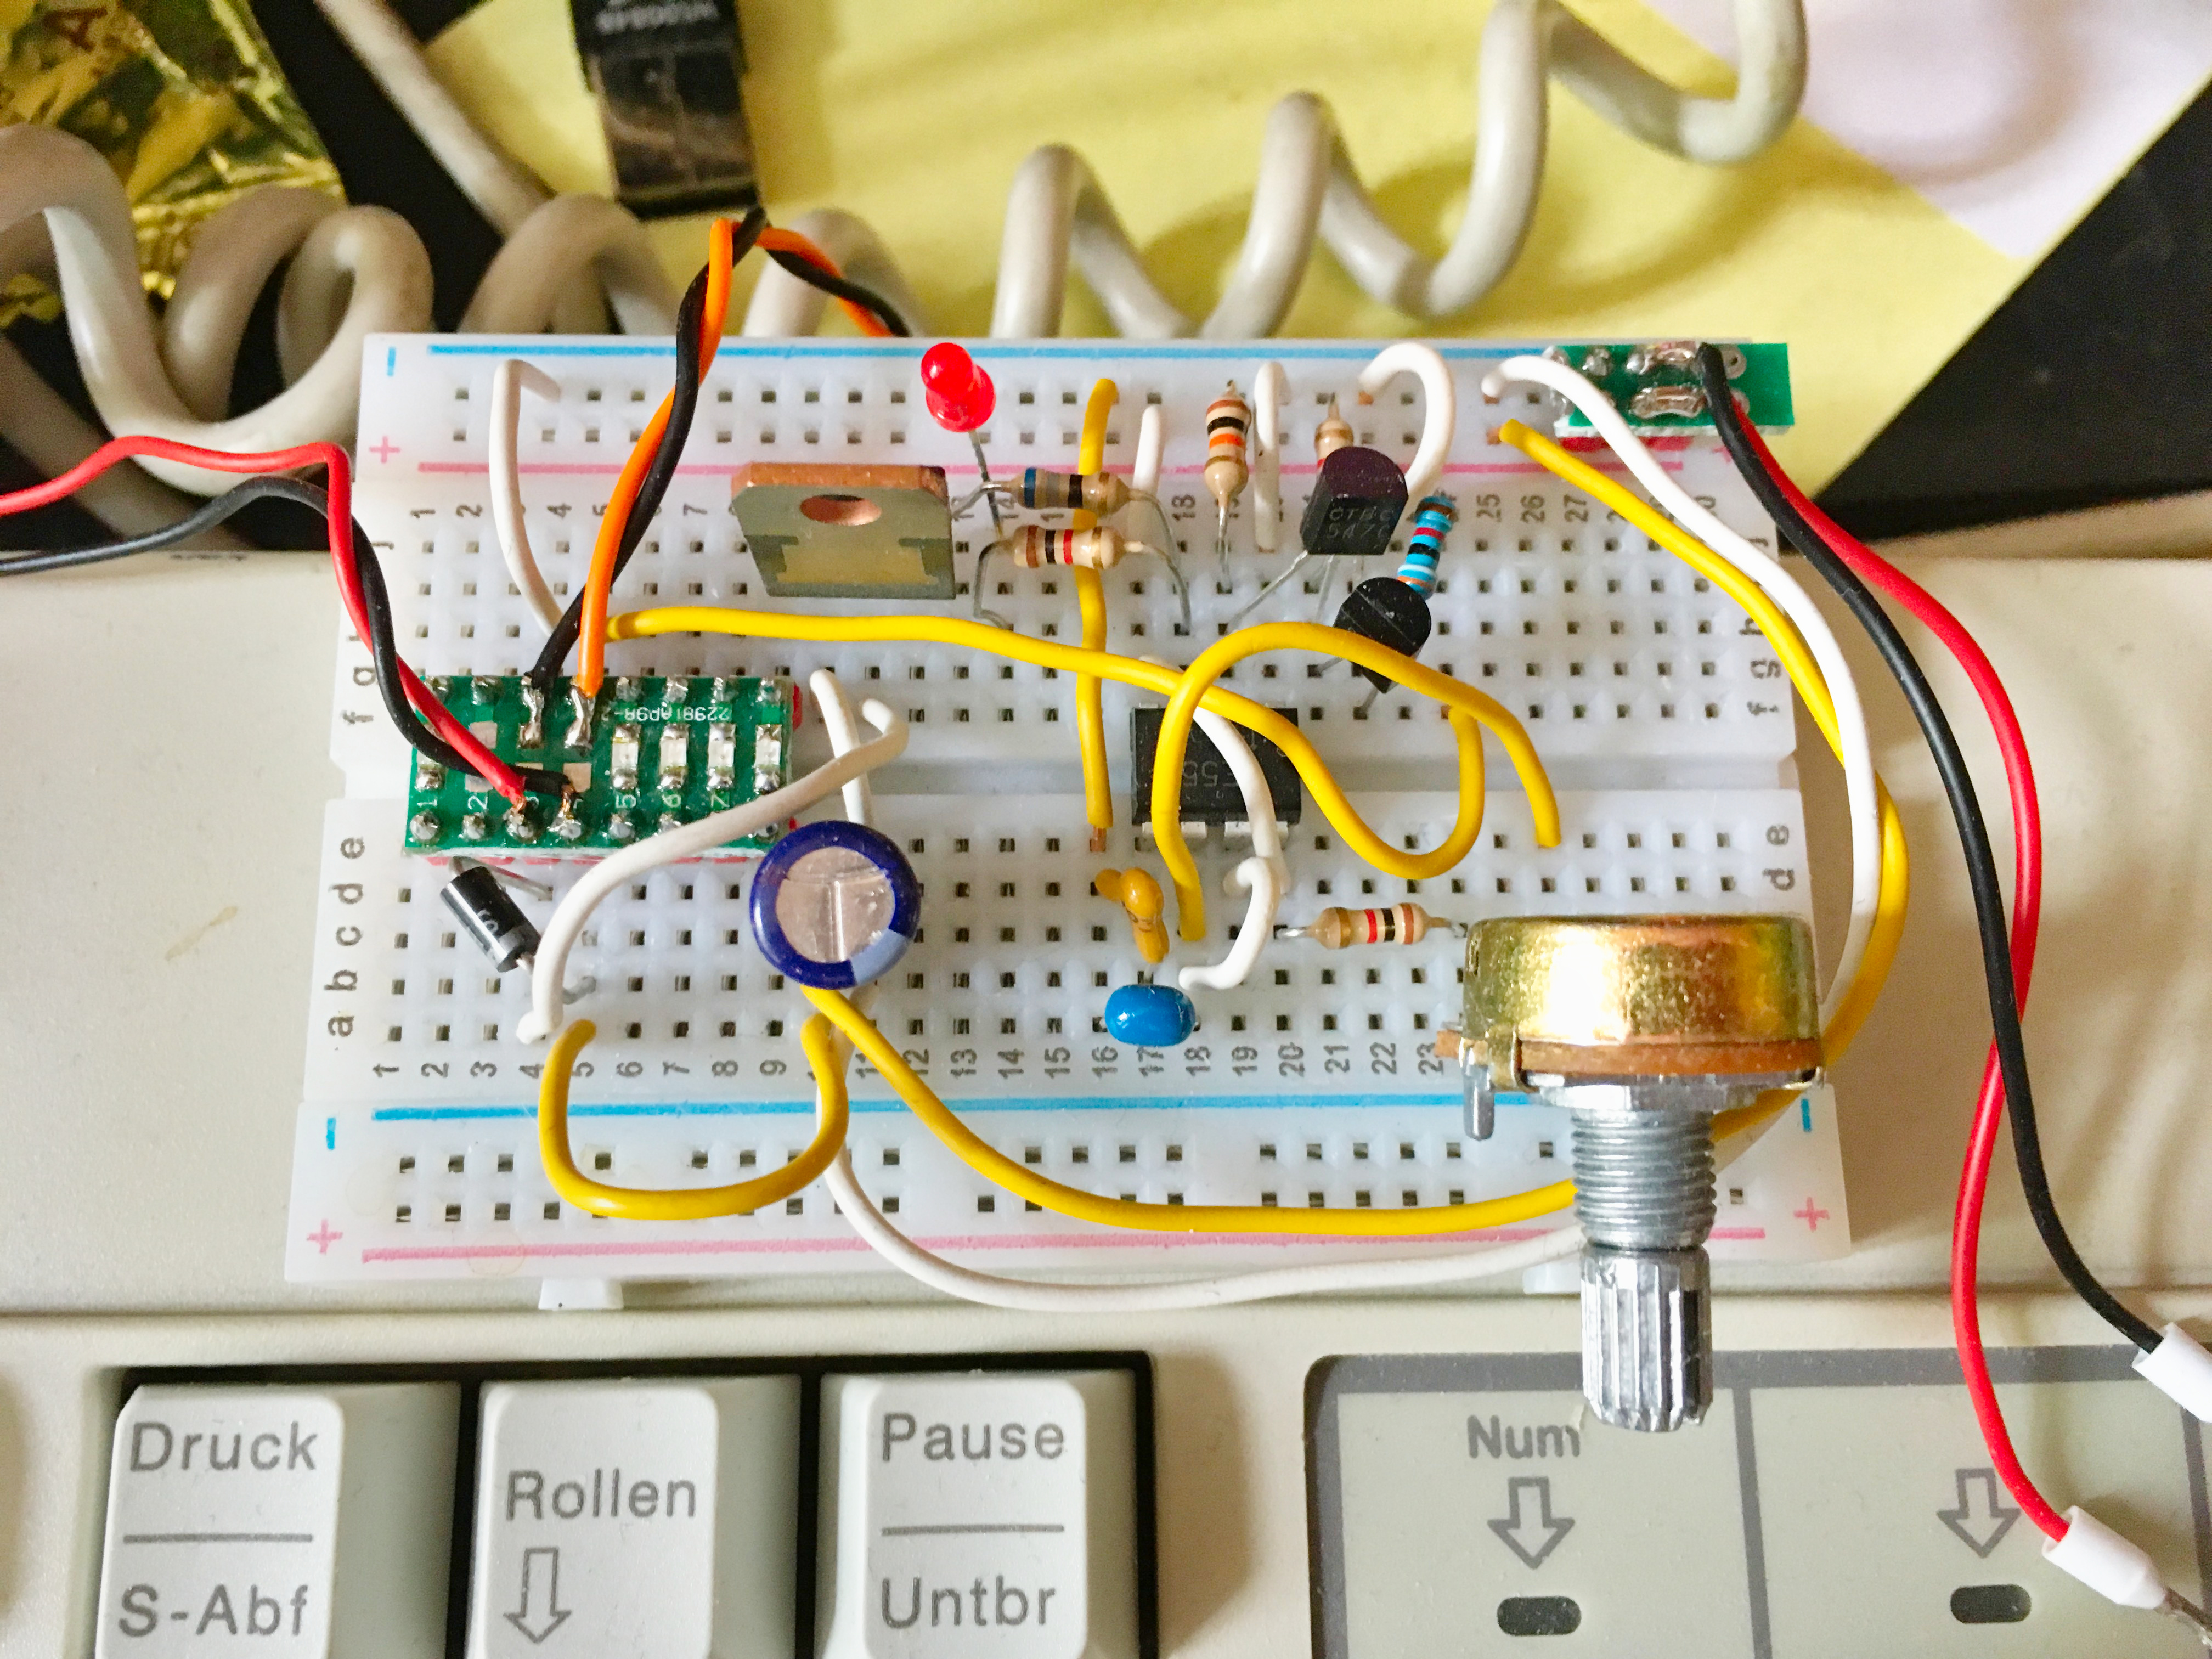 The circuit built on a breadboard